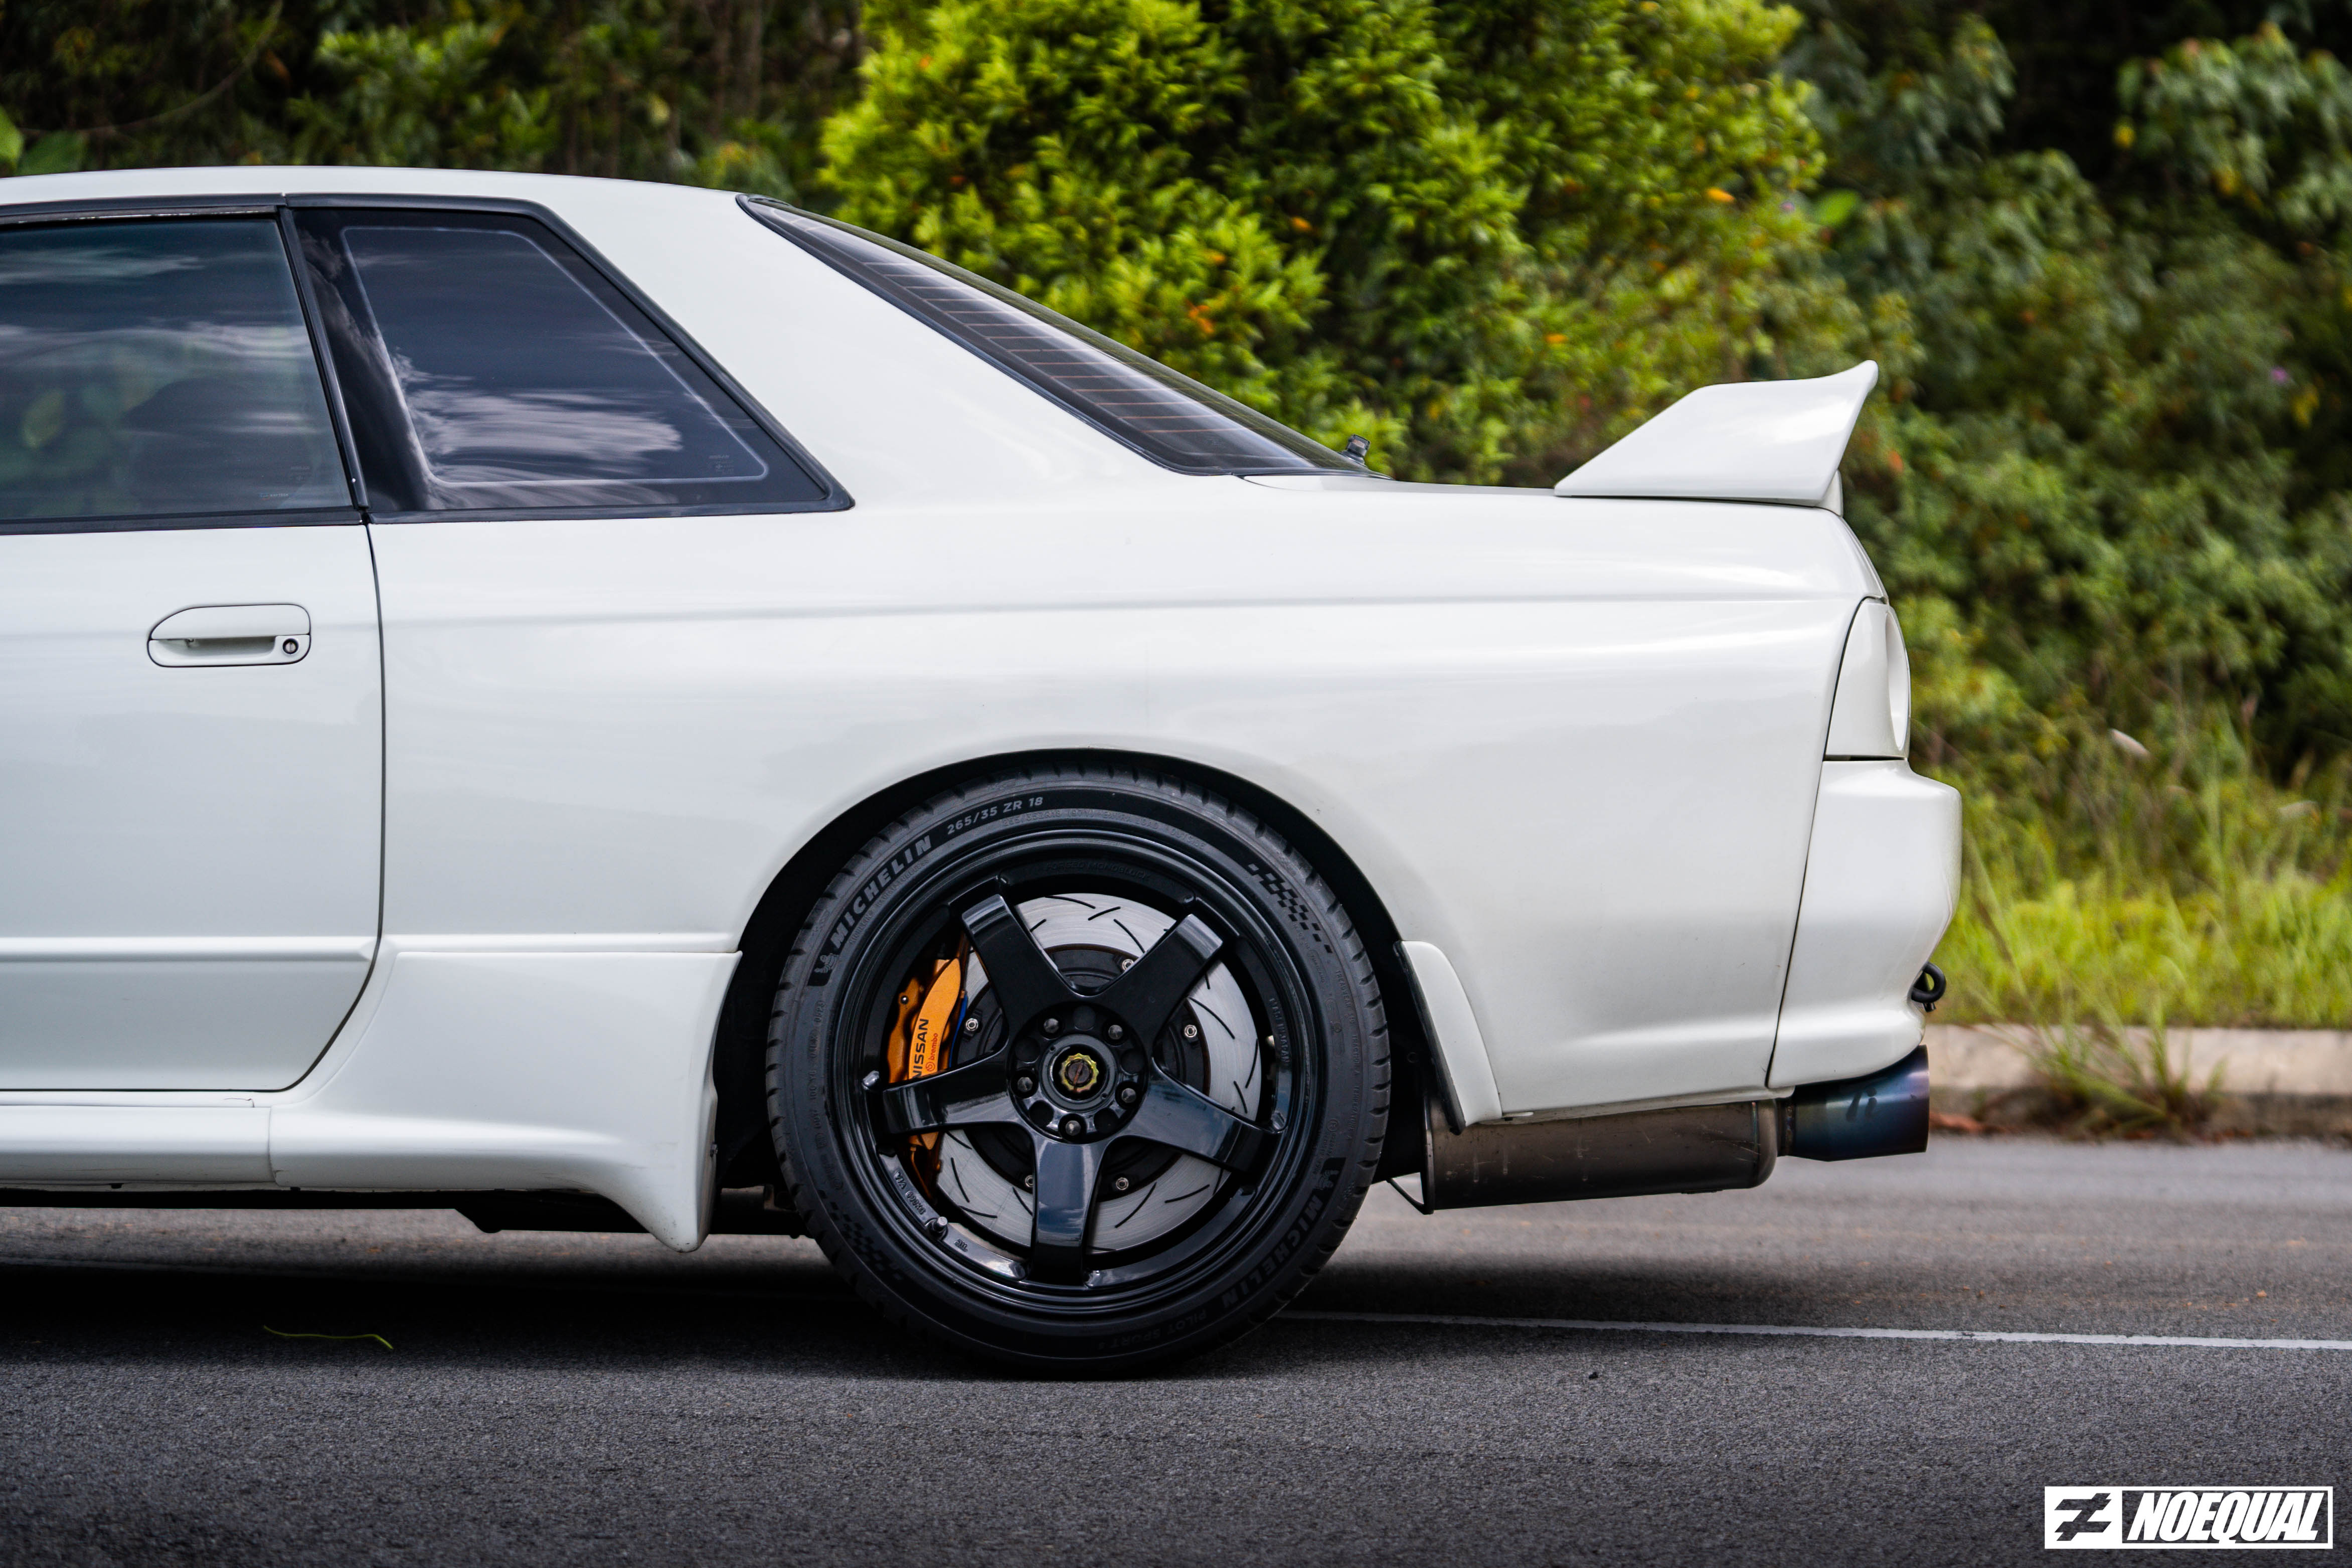 Understanding the Michelin PS5 with a Nissan Skyline GT-R!